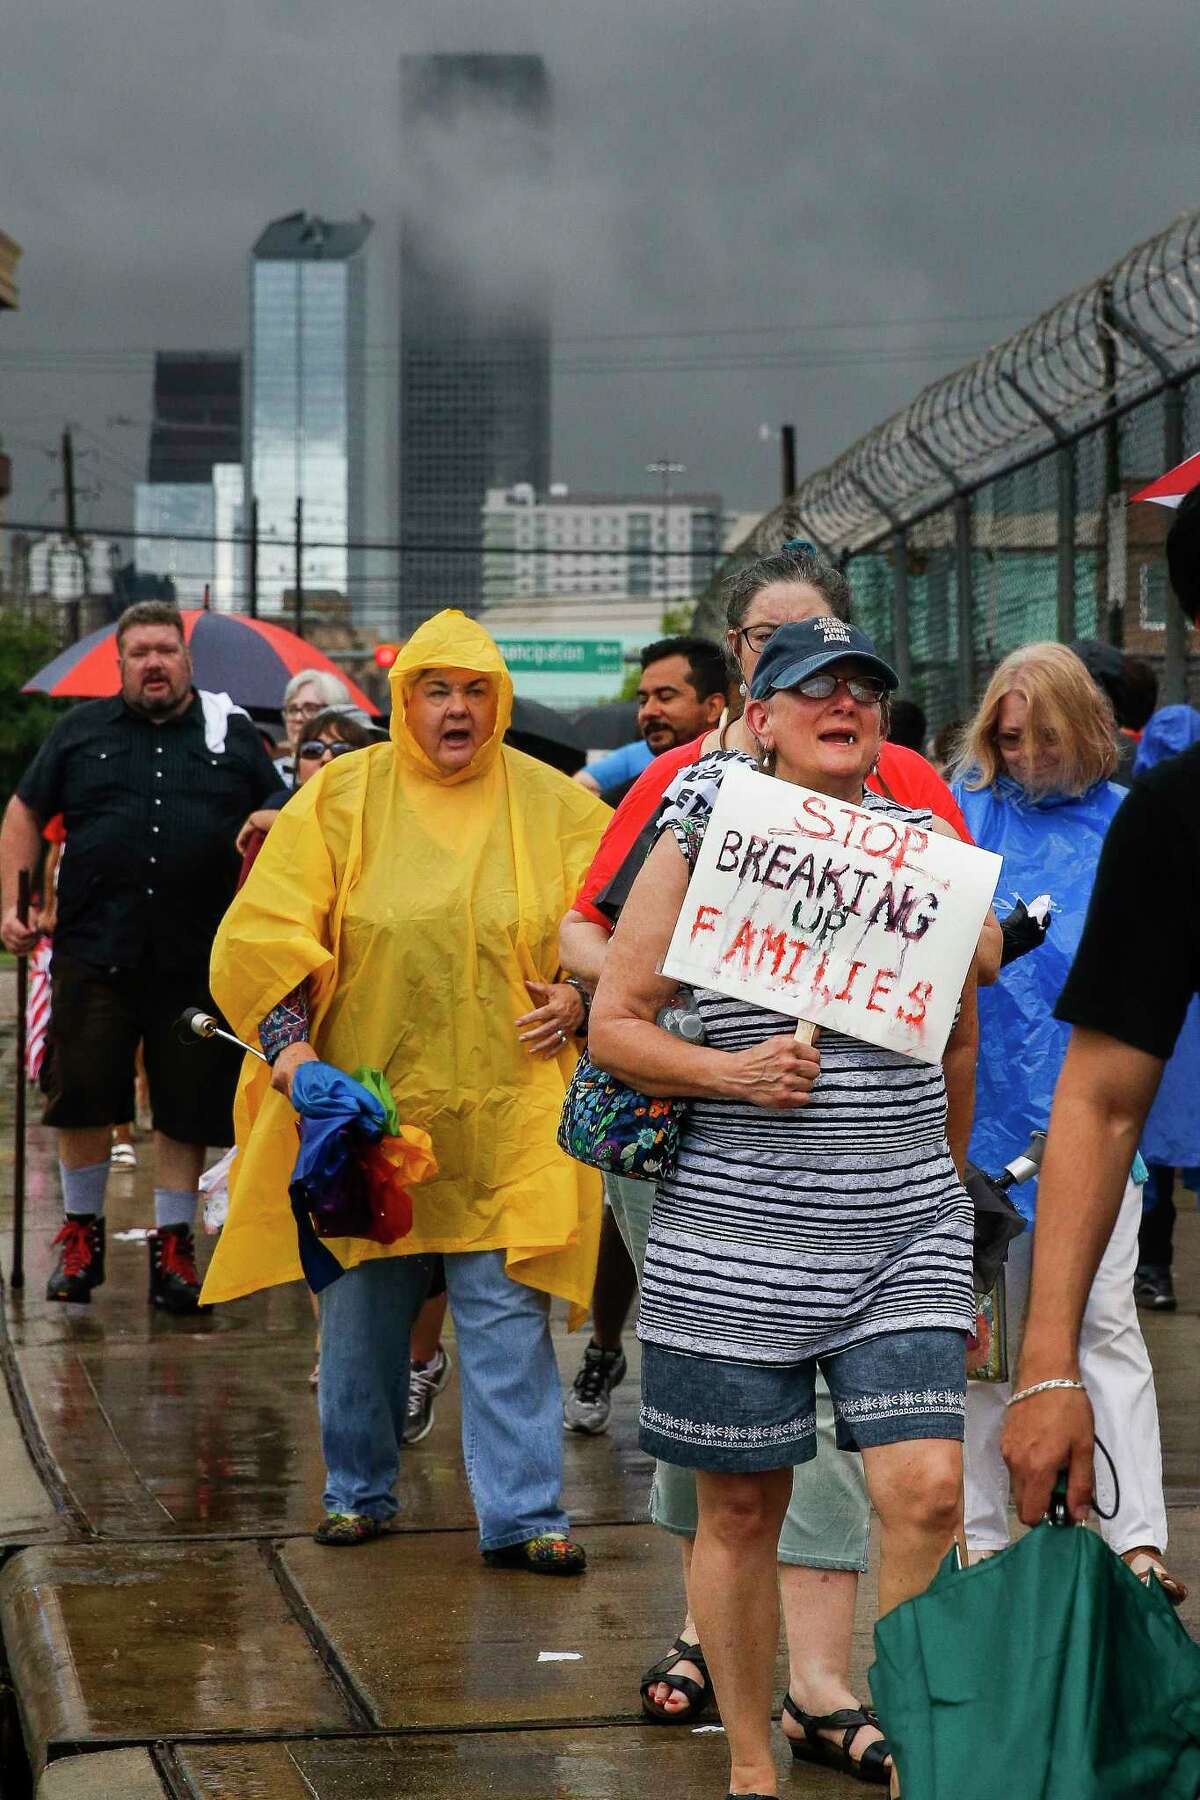 Protesters march during a Families Belong Together prayer vigil outside a facility near downtown Houston that has been leased to house unaccompanied immigrant children Sunday, June 17, 2018.